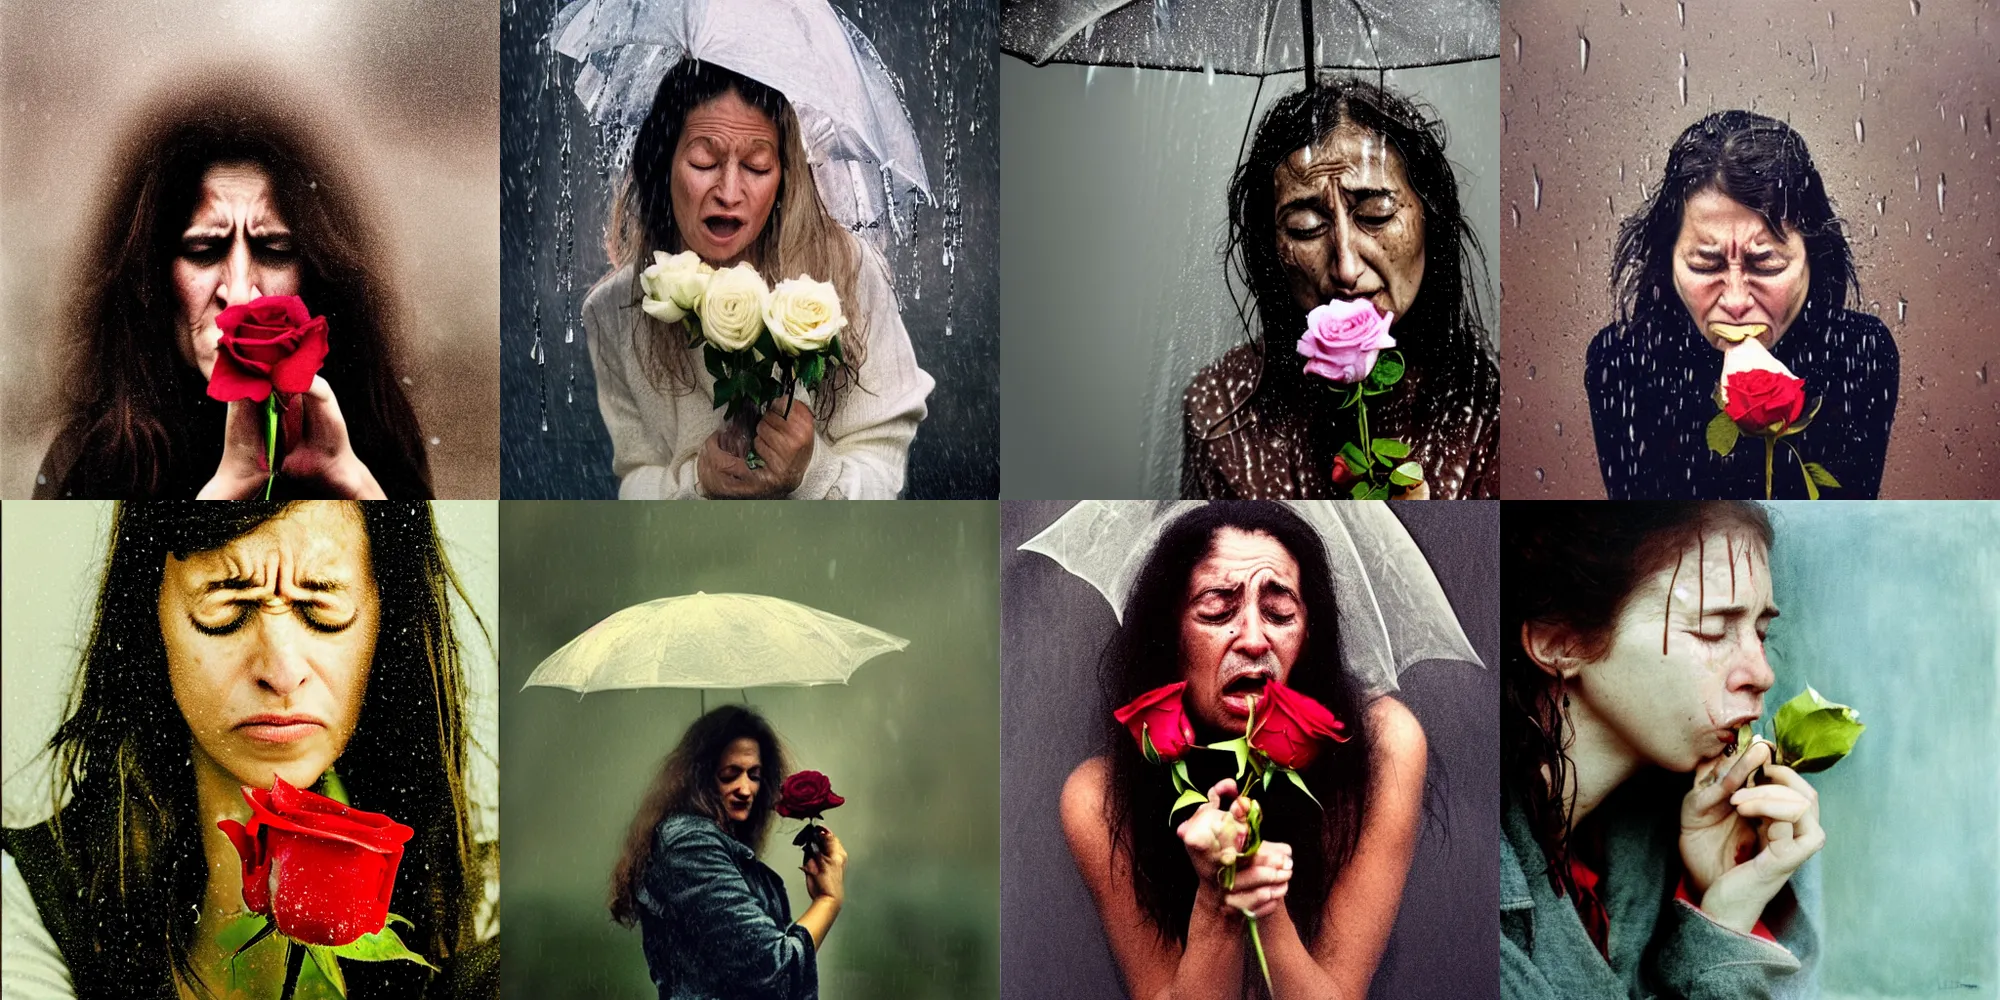 Prompt: a portrait photo of a crying women clutching a rose in the rain, photorealistic, photo by annie leibovitz